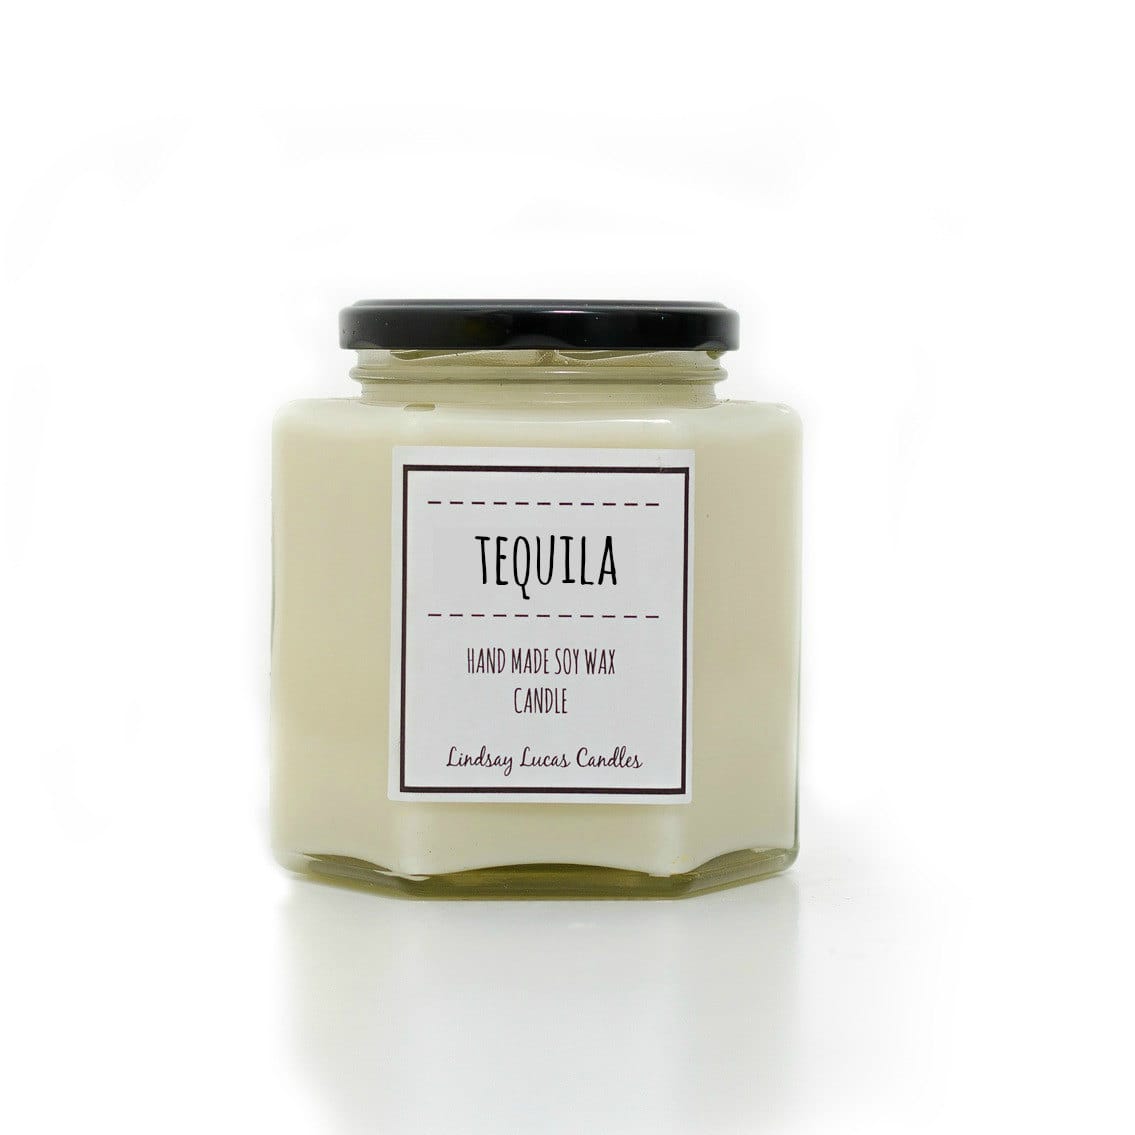 Make Your Home Smell Like A Fiesta With The Tequila Candle